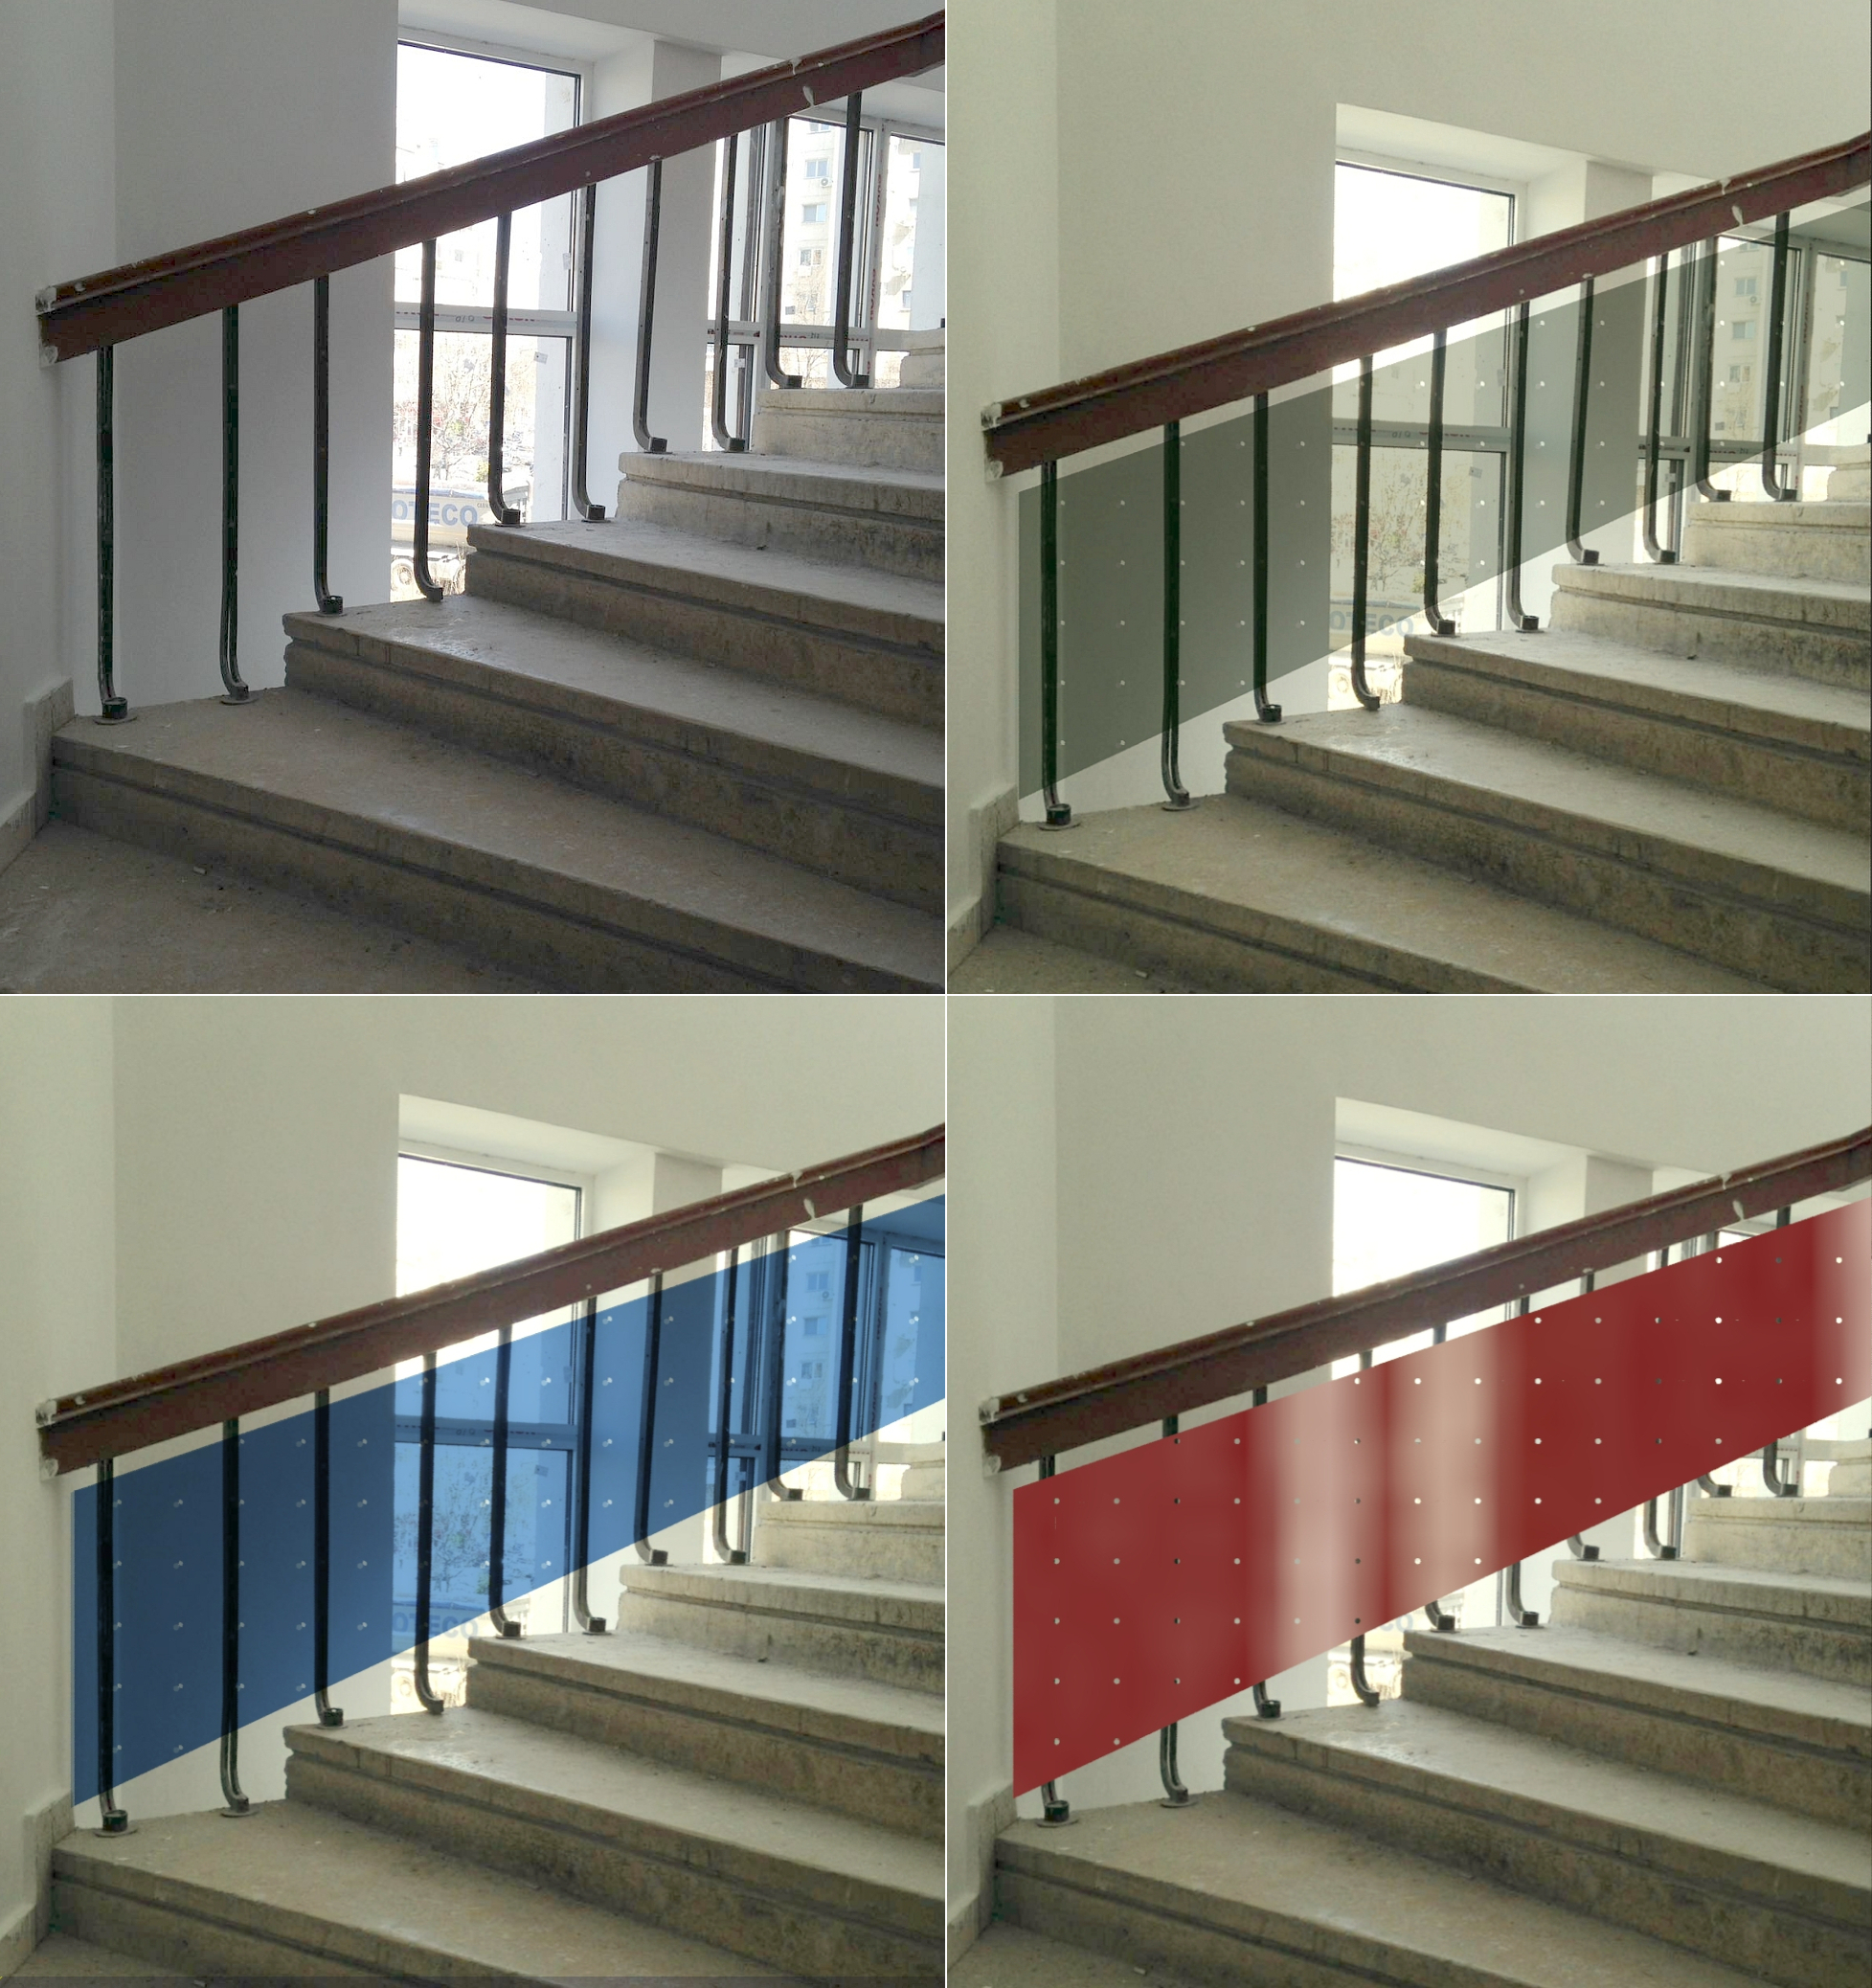 Transparent balustrade, an example of adding 3D objects to pictures